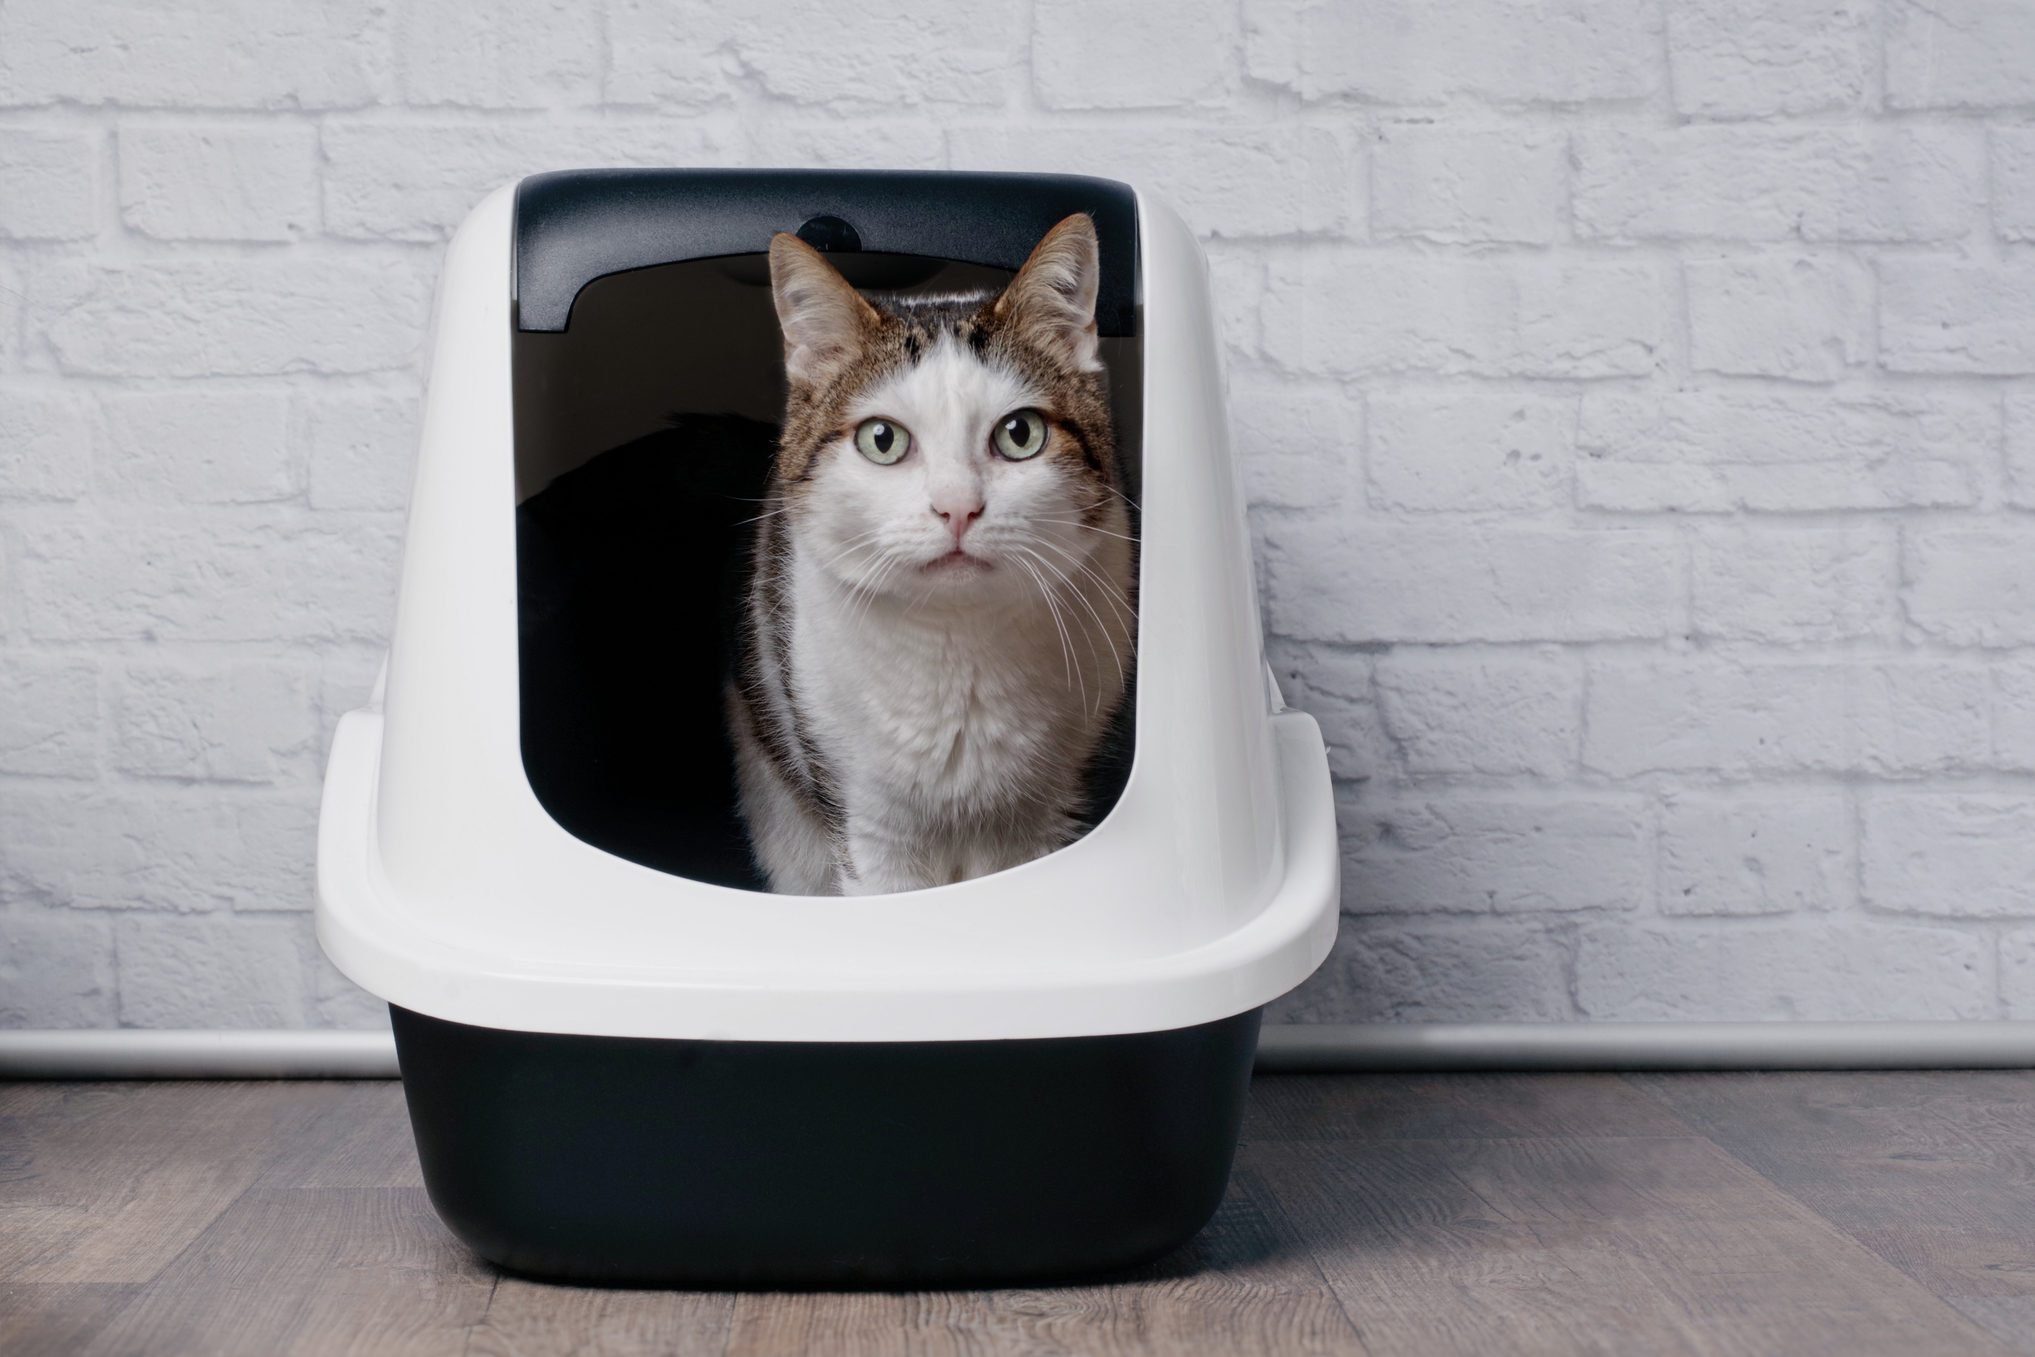 Tabby cat sitting in a litter box and look to the camera.